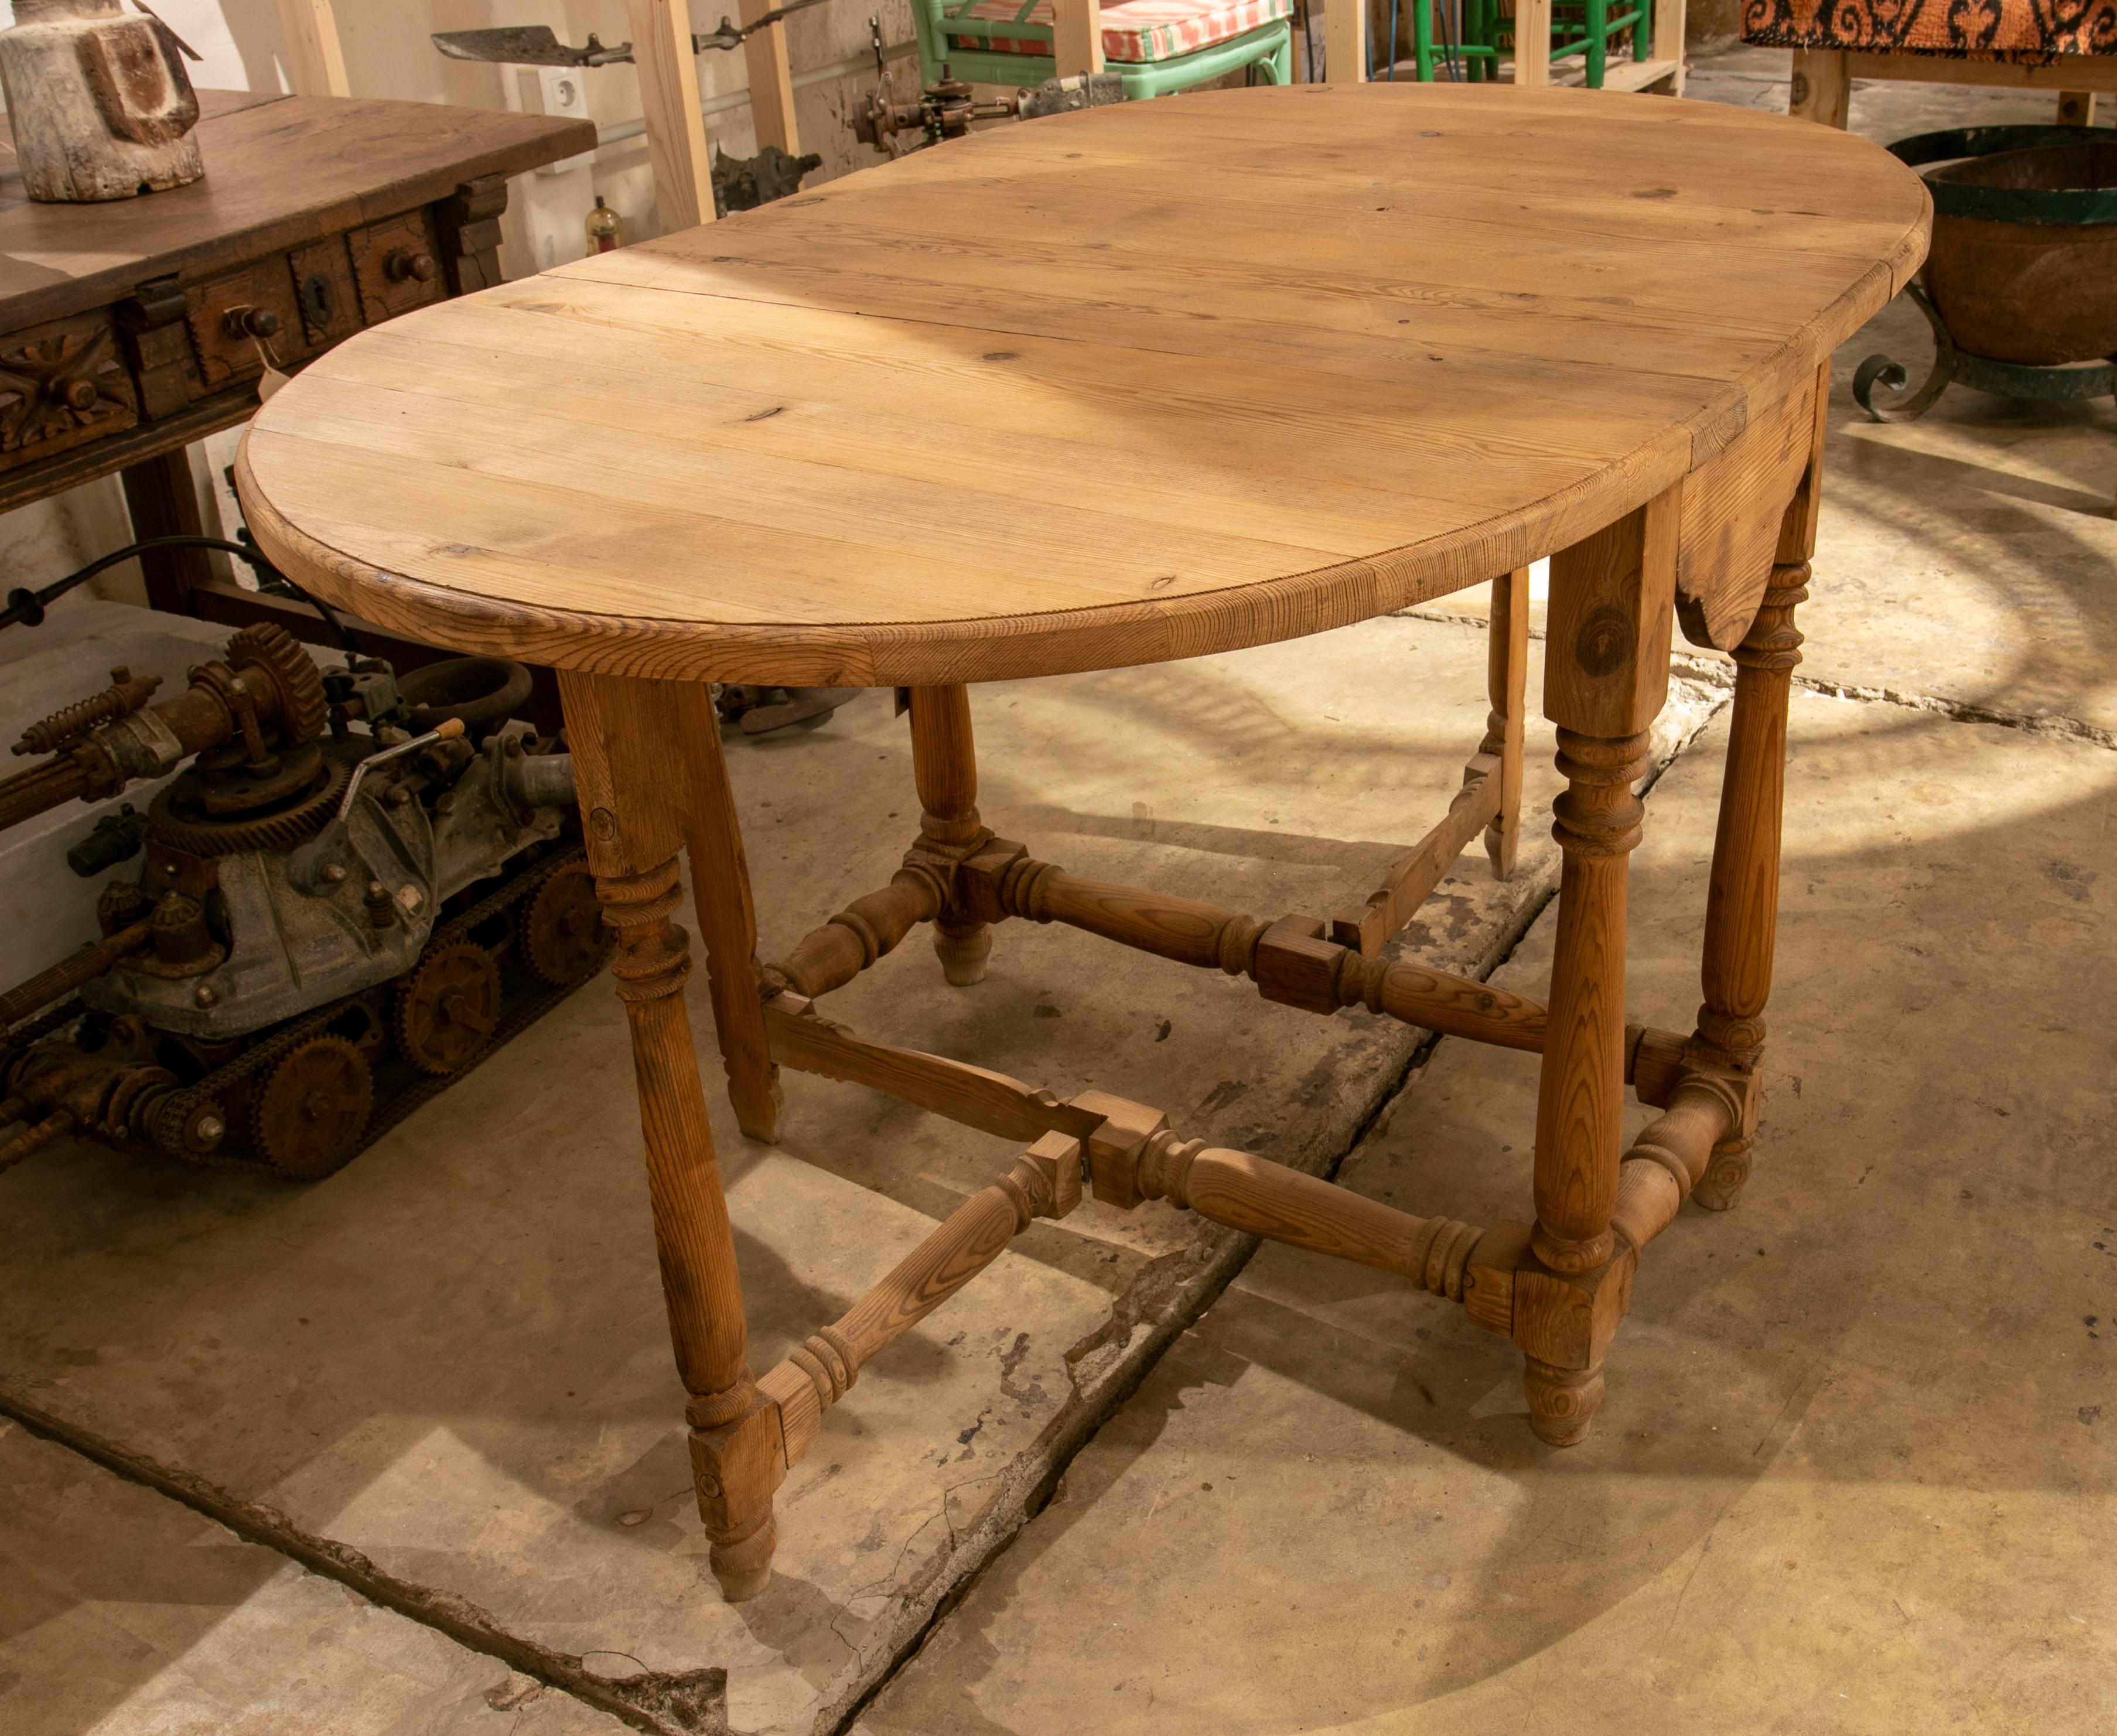 Wooden carved wing table with turned legs and hinged sides.